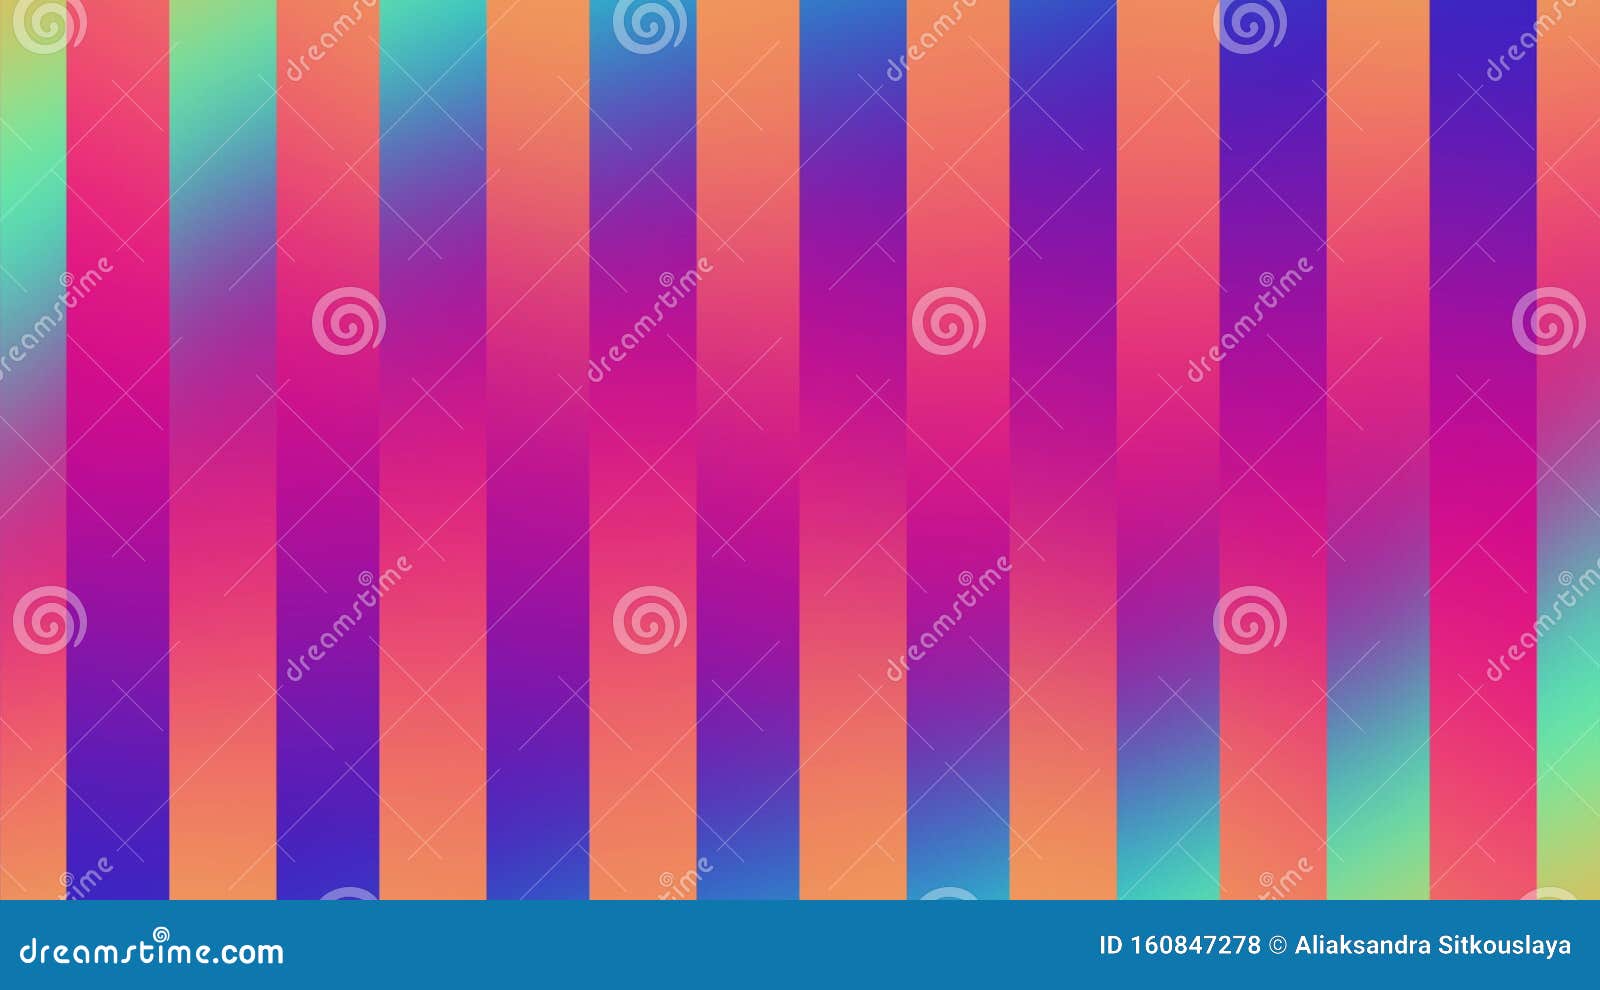 Audio Visual Seamless Loop 3D Animation of Color Light for Your Video  Presentation Backgrounds, Concert Visual Identity Stock Illustration -  Illustration of effect, equalizer: 160847278